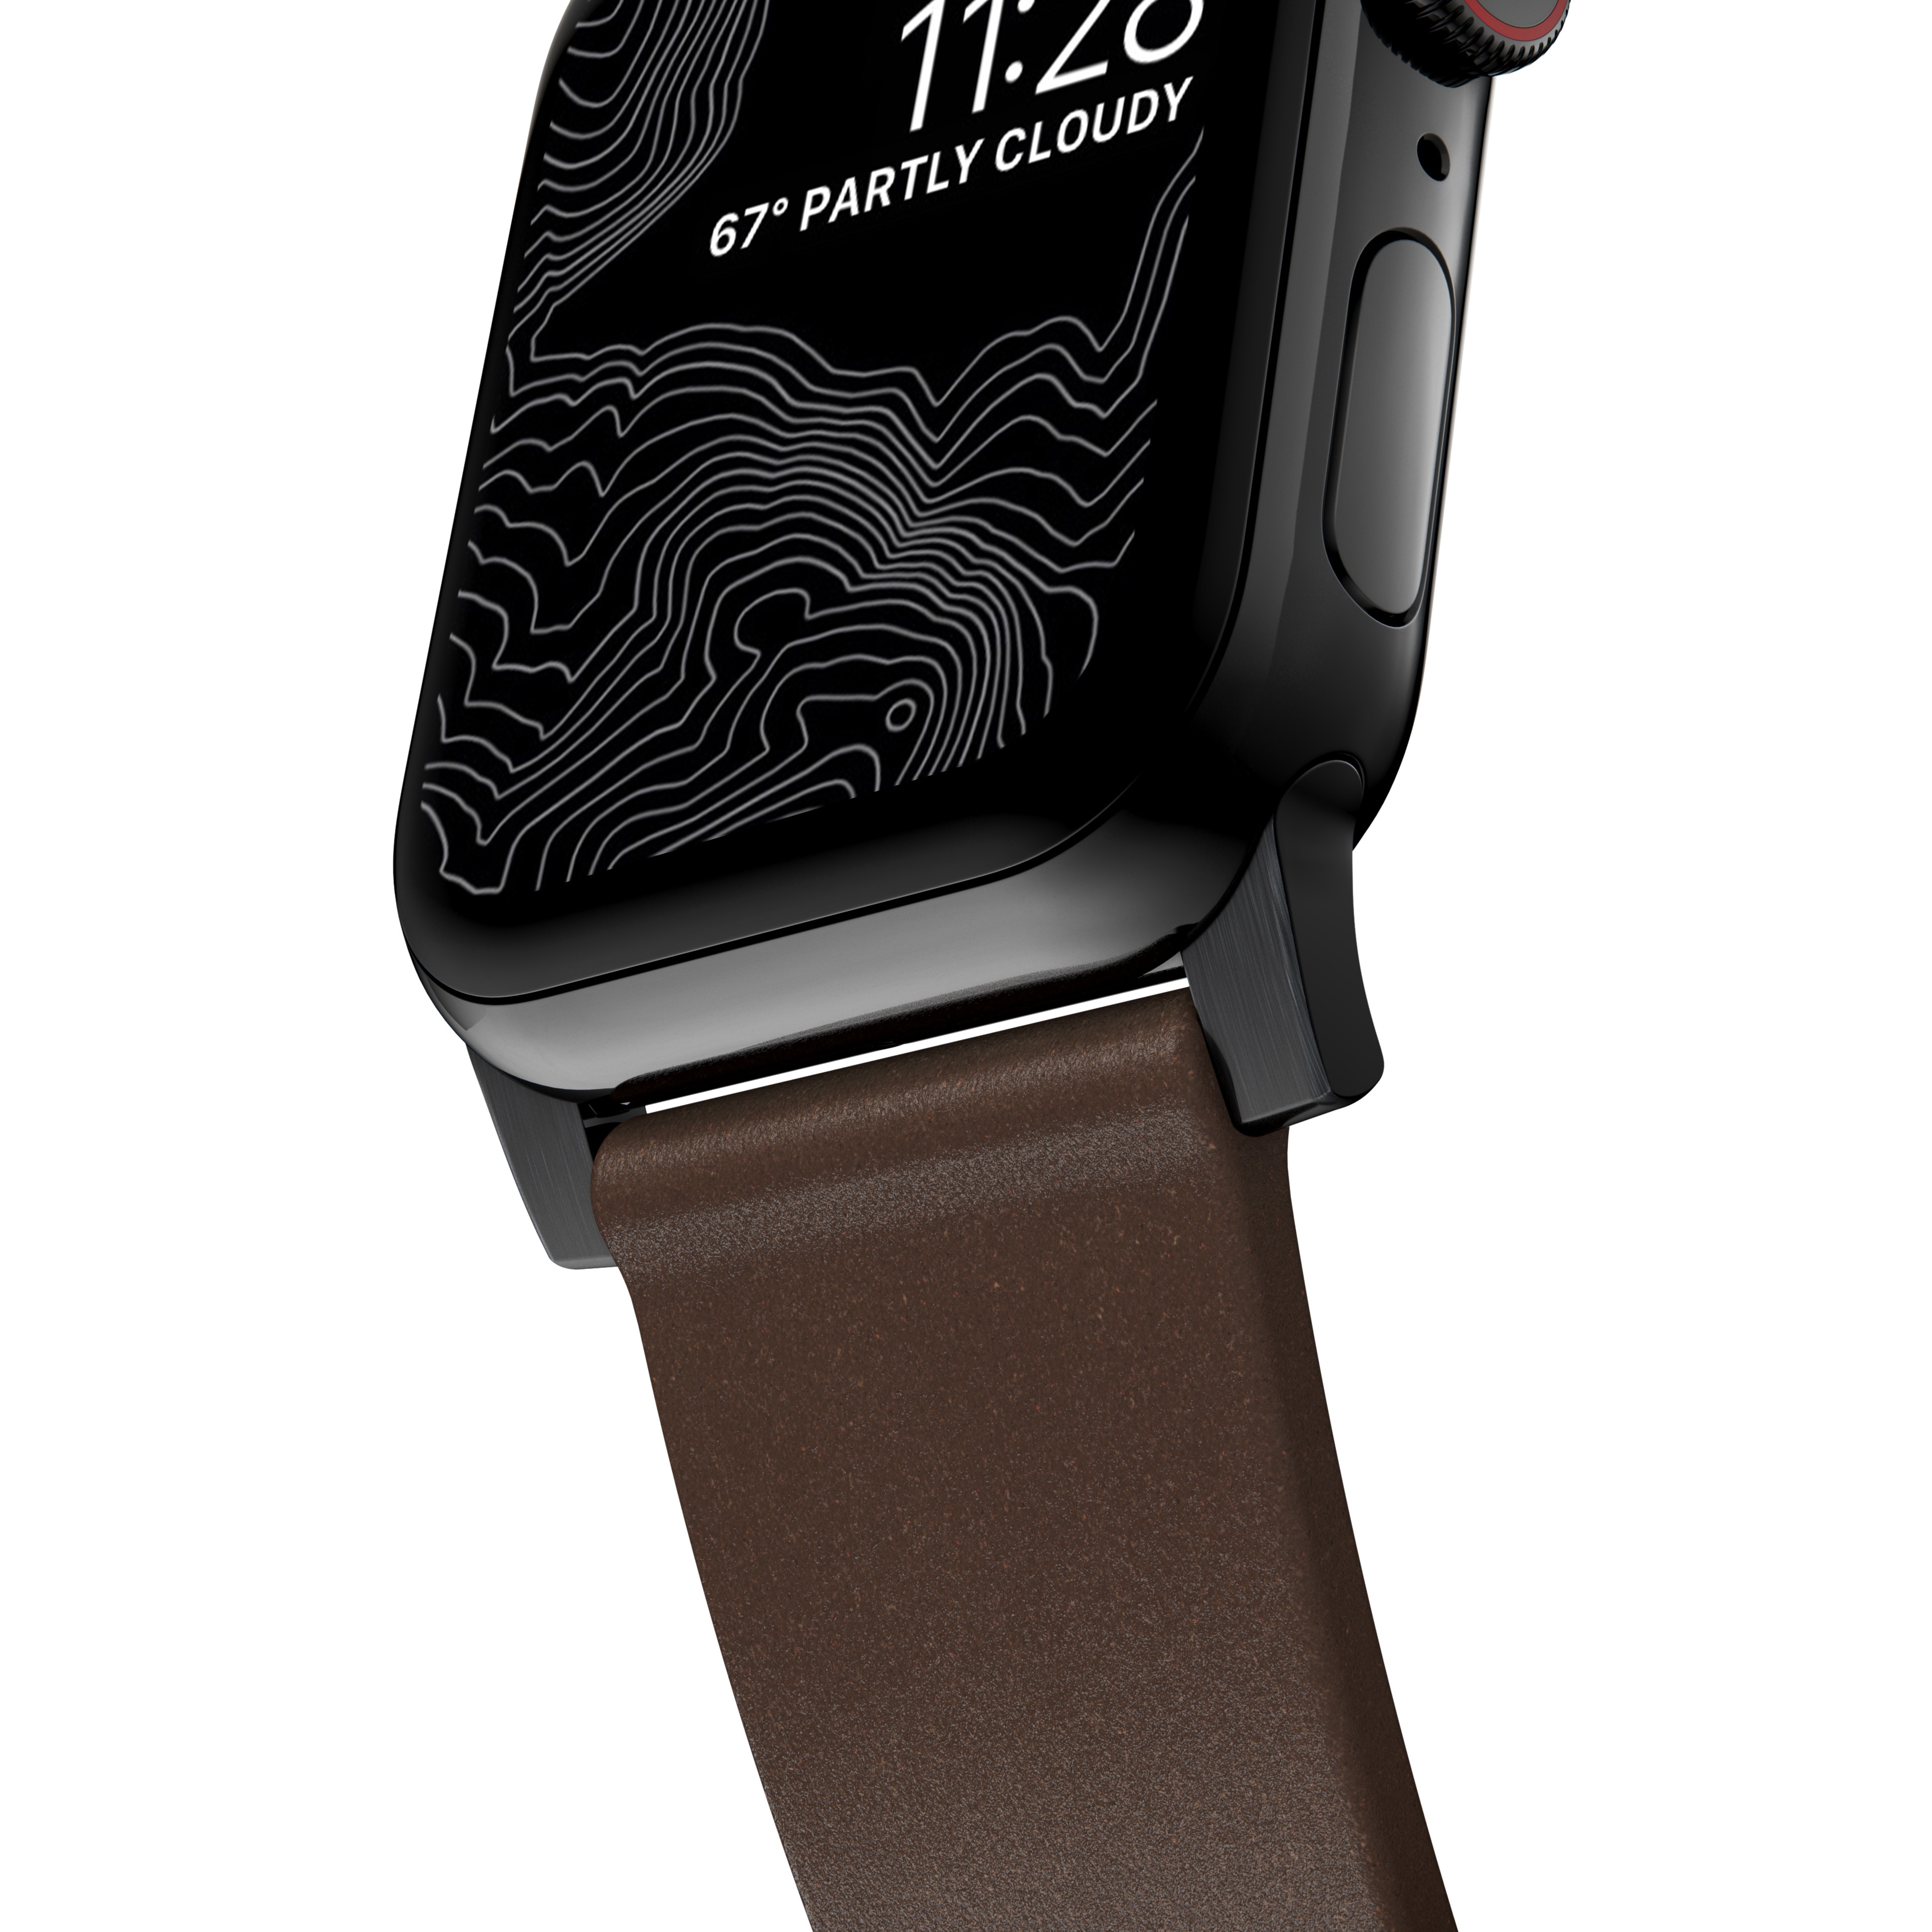 Modern Band Horween Leather Apple Watch 38mm Rustic Brown (Black Hardware)